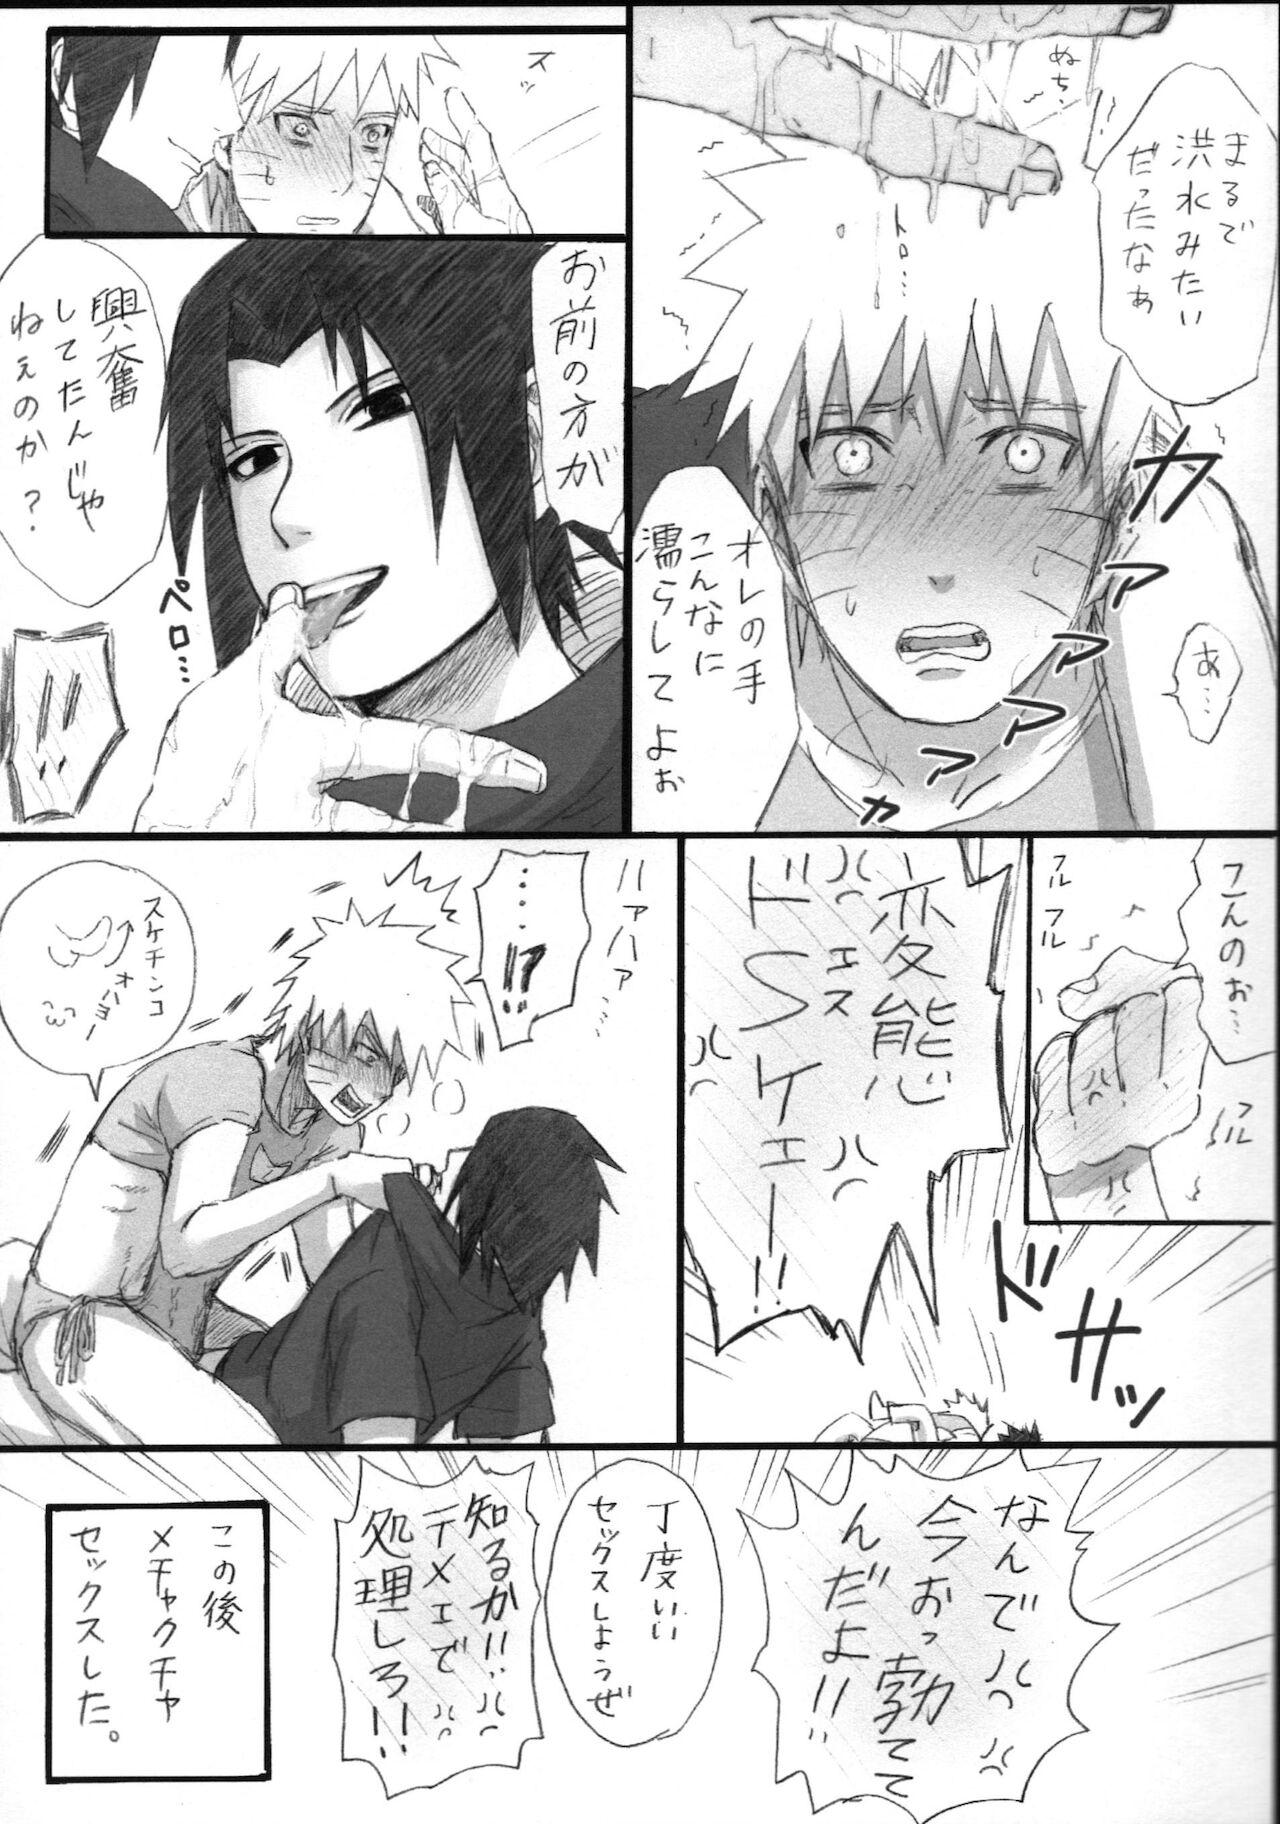 Foreskin Love Infection Nver. - Naruto Amature Sex Tapes - Page 8